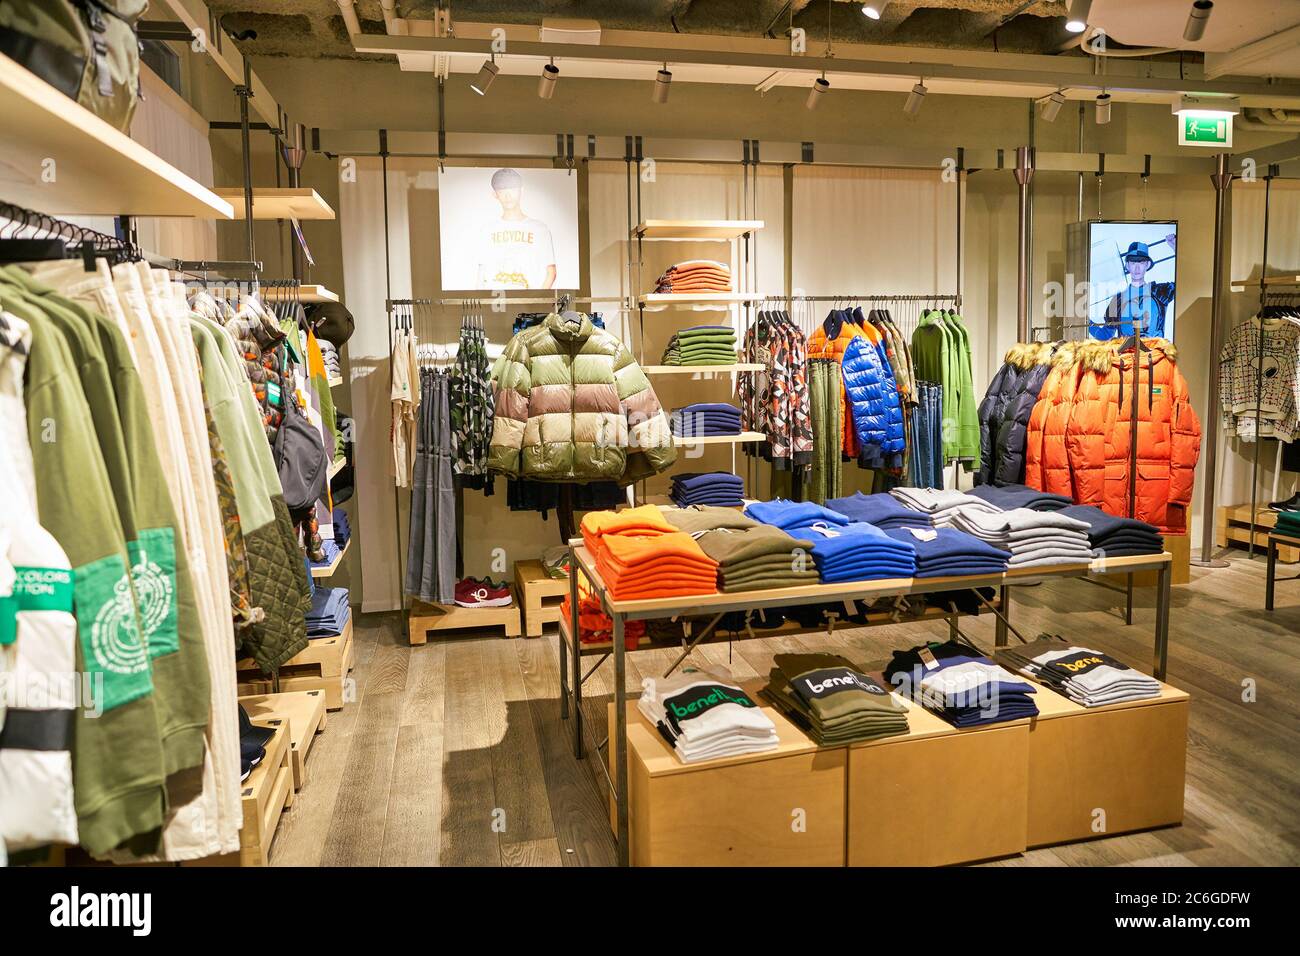 BERLIN, GERMANY - CIRCA SEPTEMBER, 2019: interior shot of United Colors of Benetton store in Berlin. Stock Photo